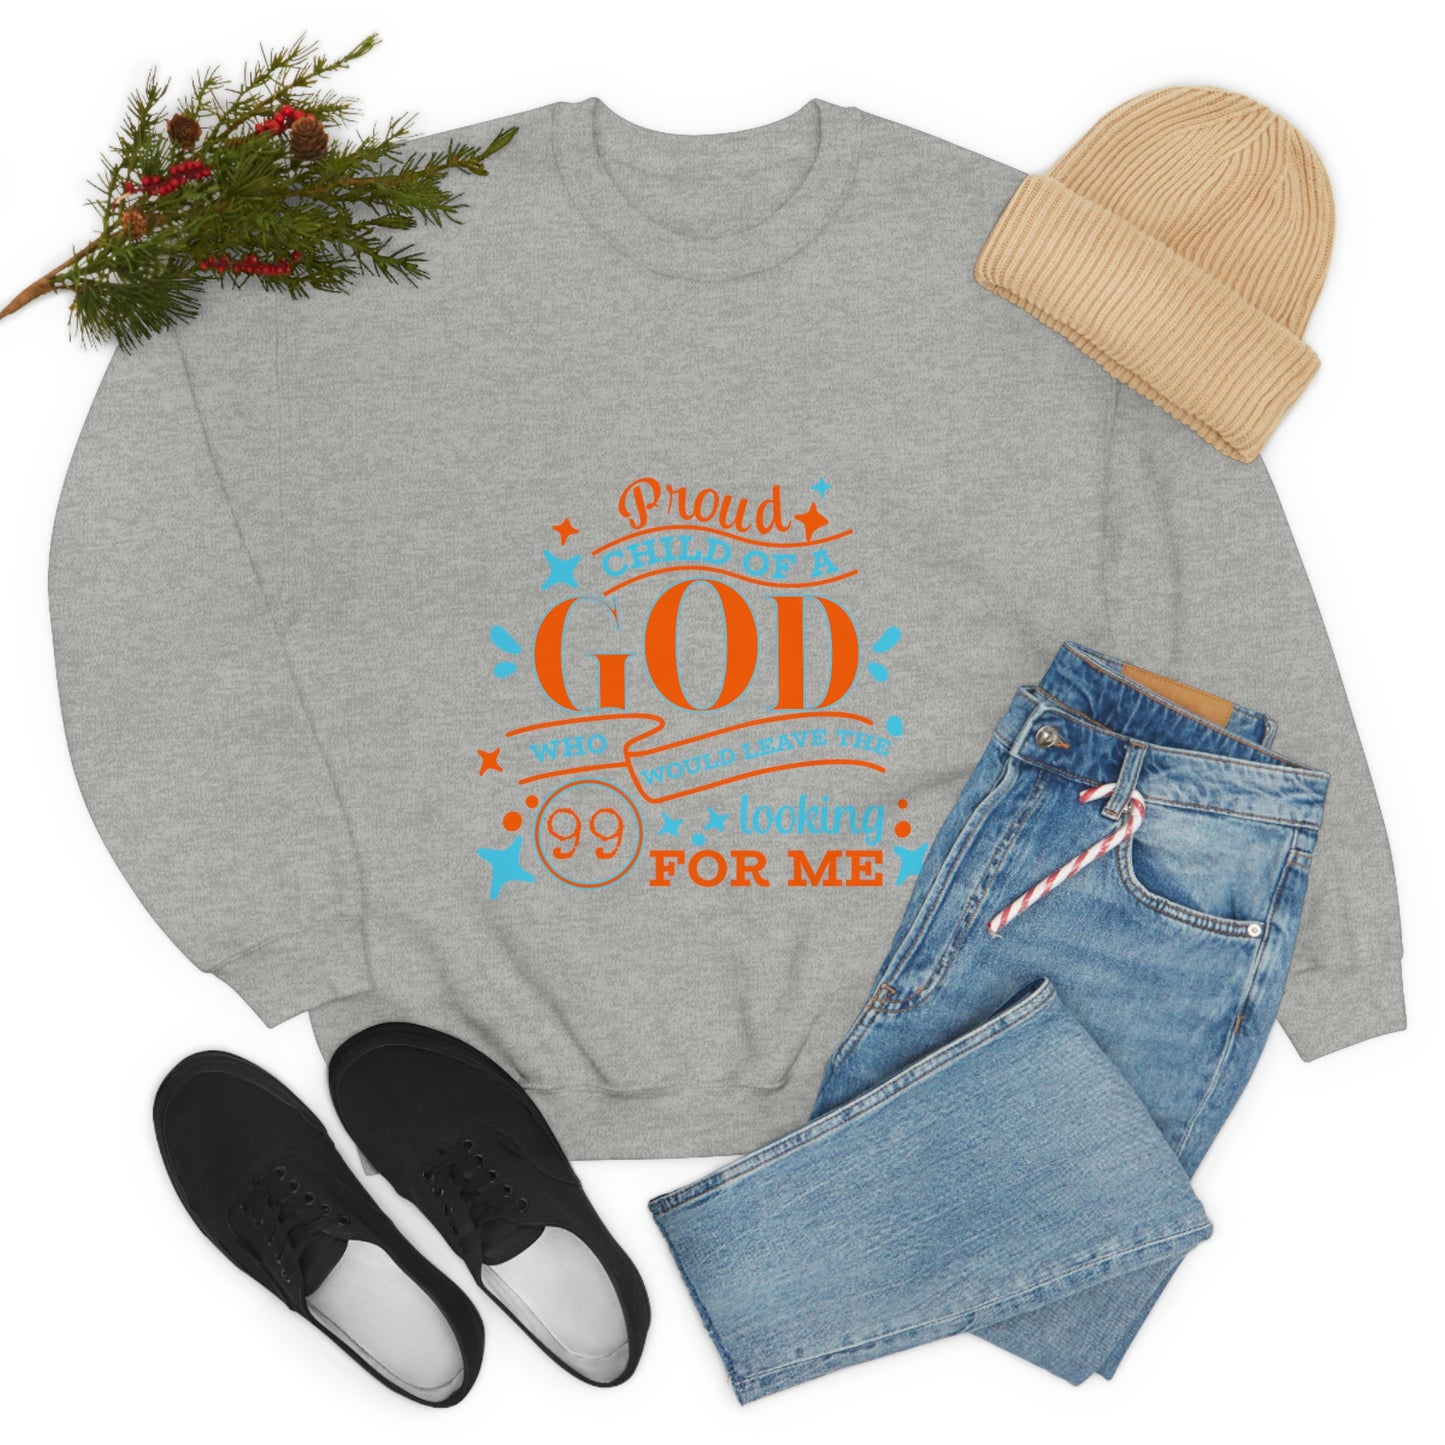 Proud Child Of A God Who Would Leave the 99 Looking For Me Unisex Heavy Blend™ Crewneck Sweatshirt